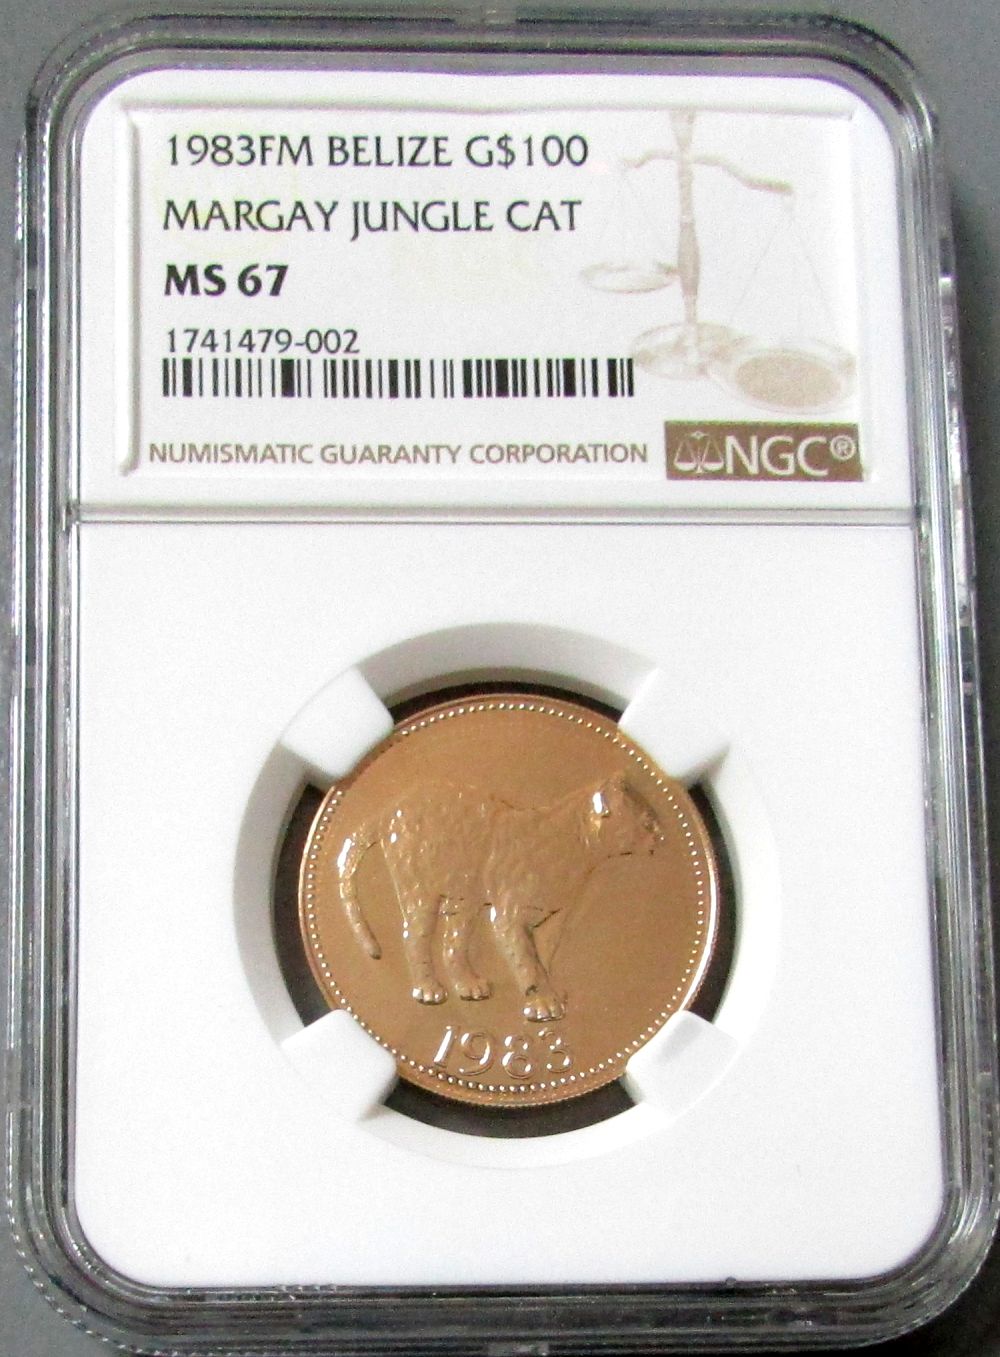 1983 FM GOLD BELIZE $100 MARGAY JUNGLE CAT NGC MINT STATE 67 "ONLY 10 MINTED